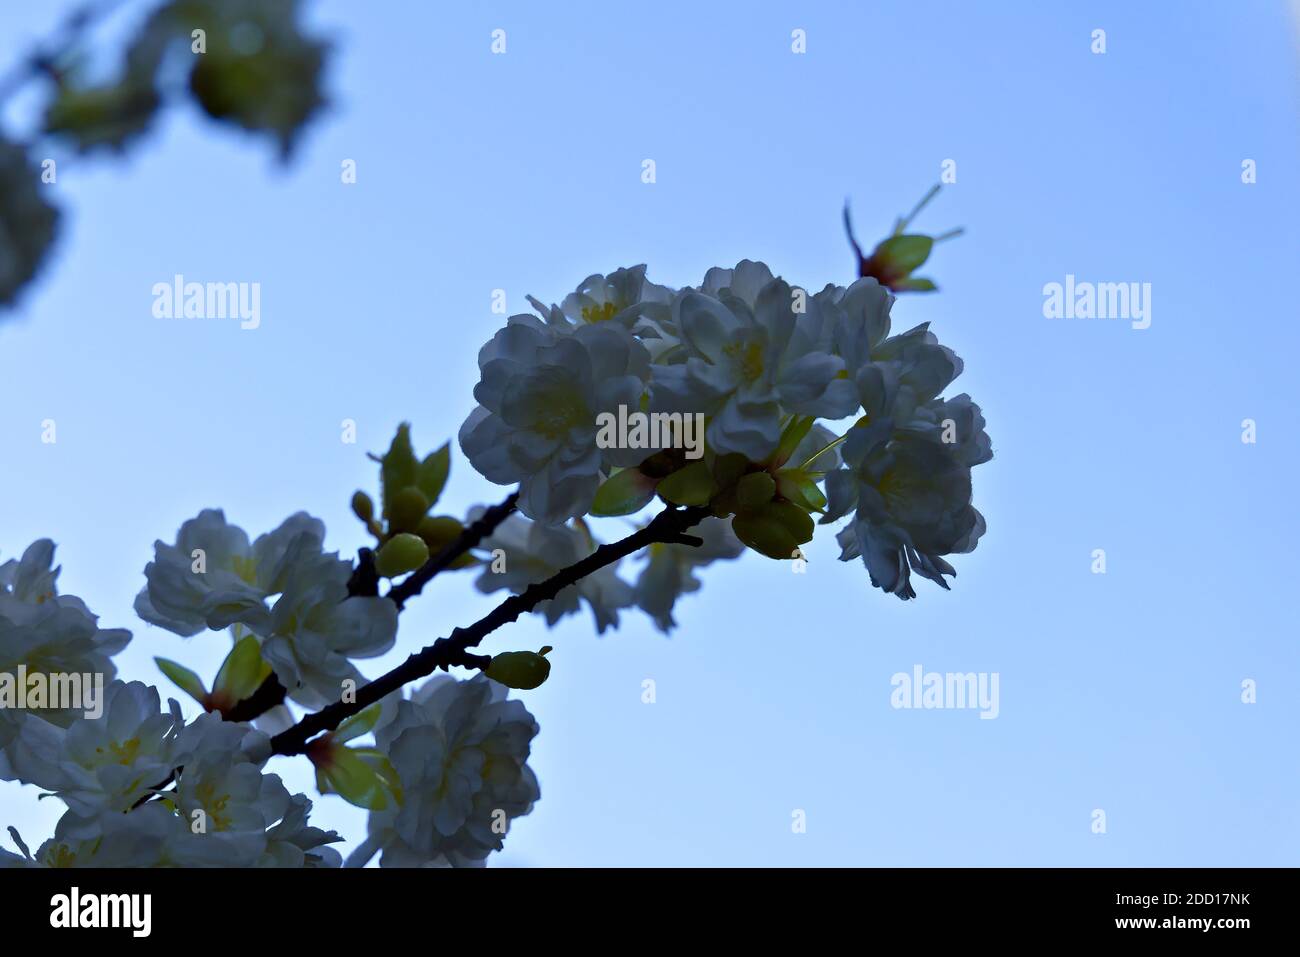 Branch of white cherry blossoms, fake plastic tree with blue skies. Stock Photo